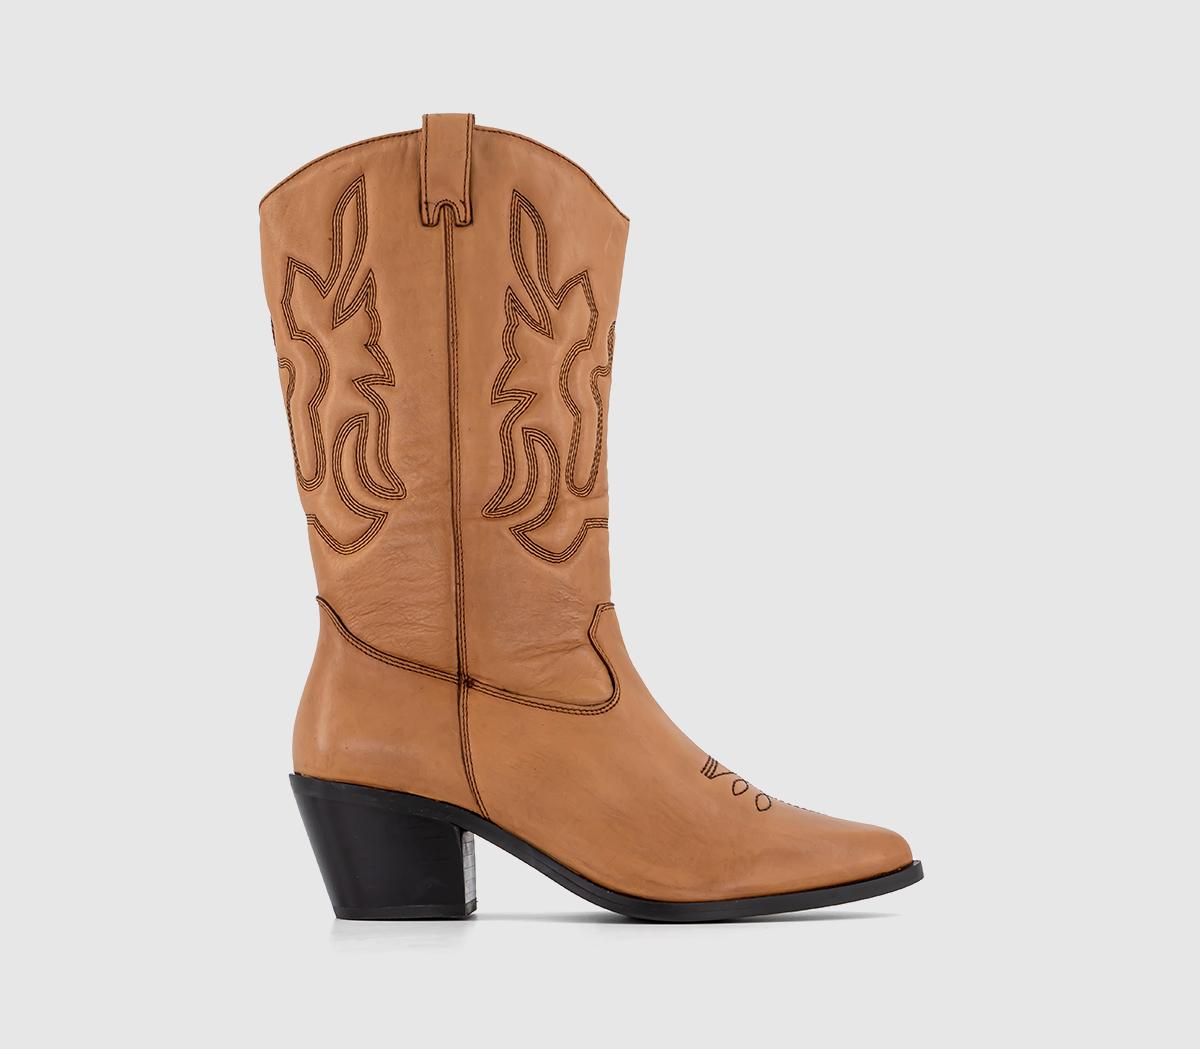 OFFICEKansas Quilted Leg Western BootsTan Leather